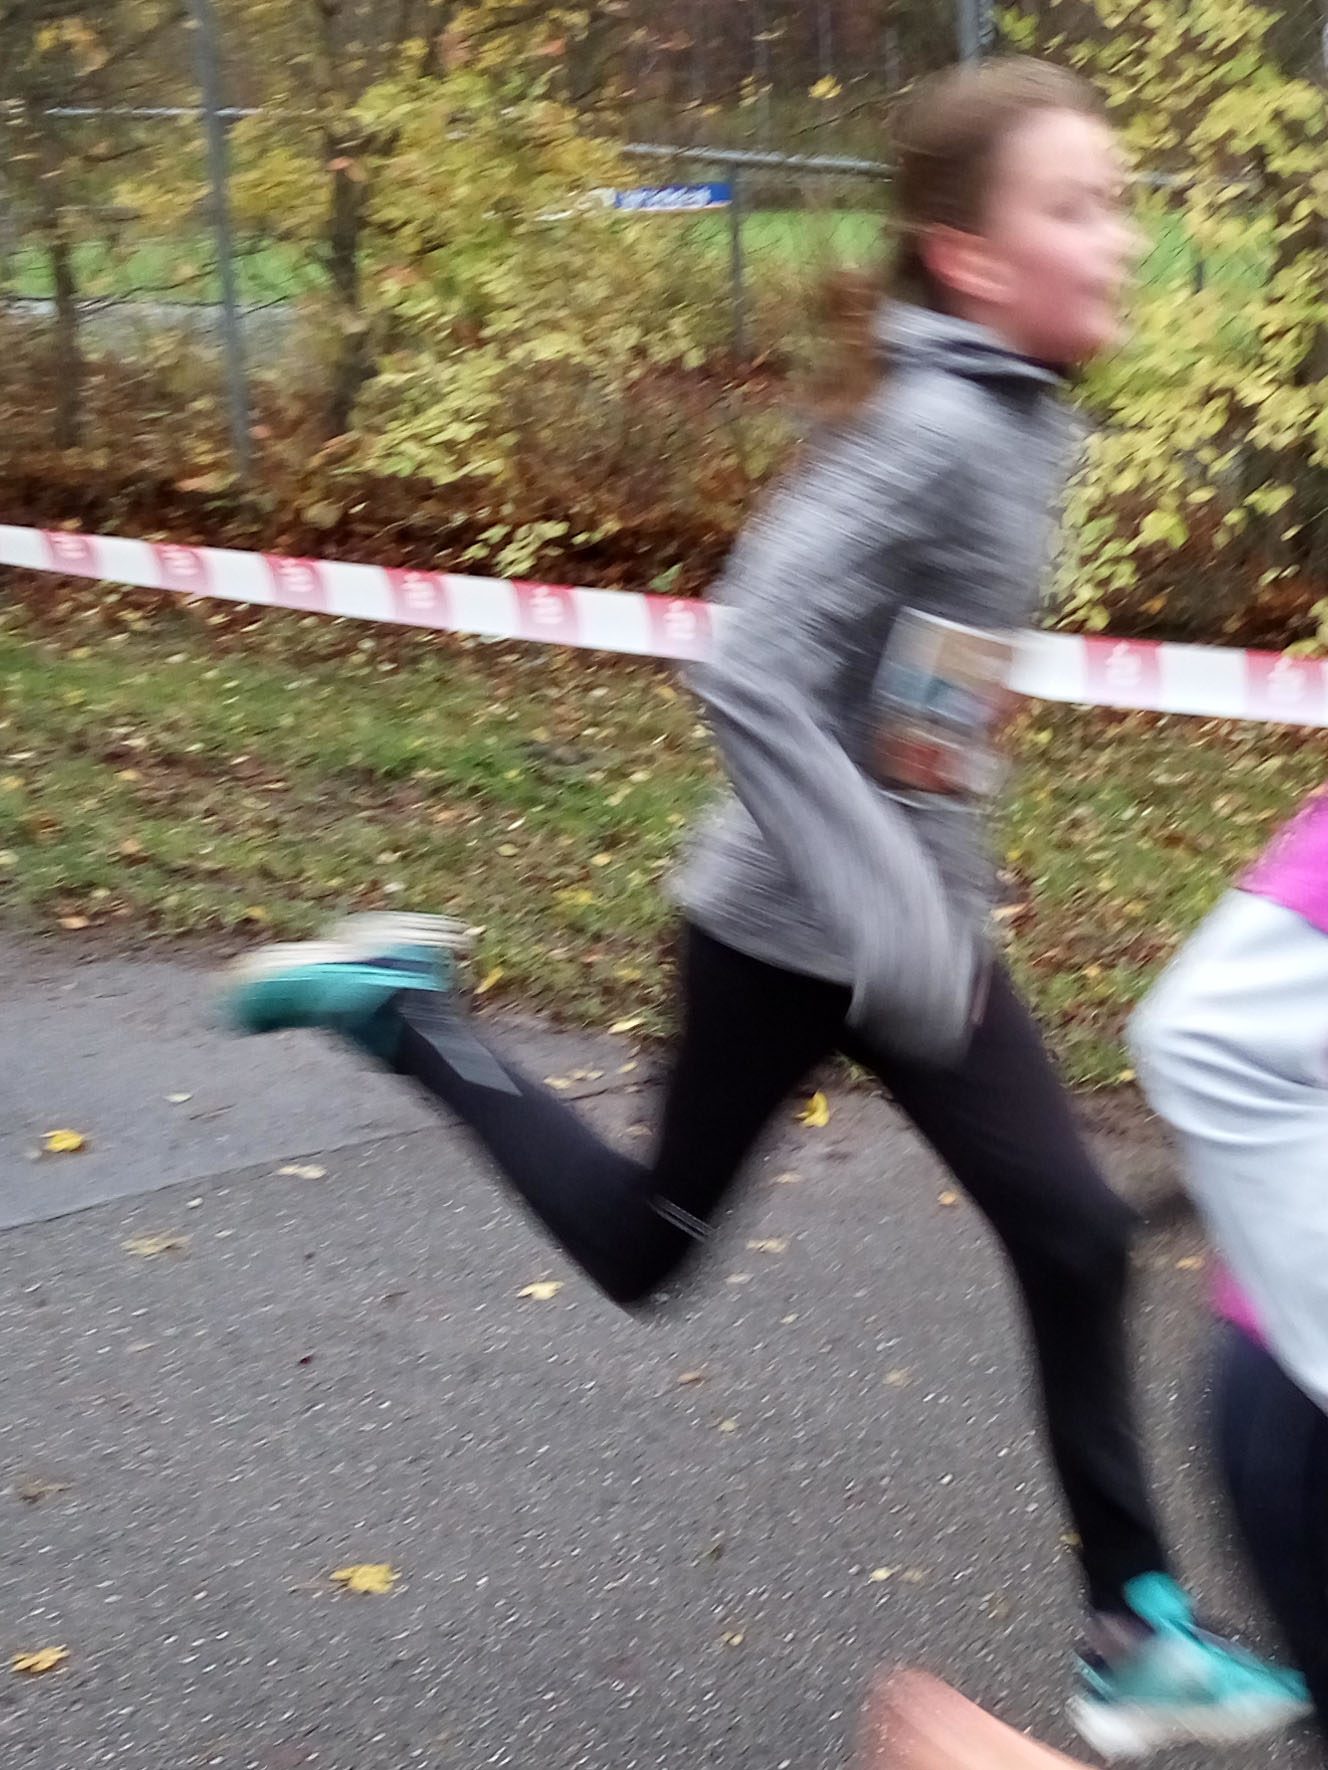 7. eXtreme-run in Magstadt